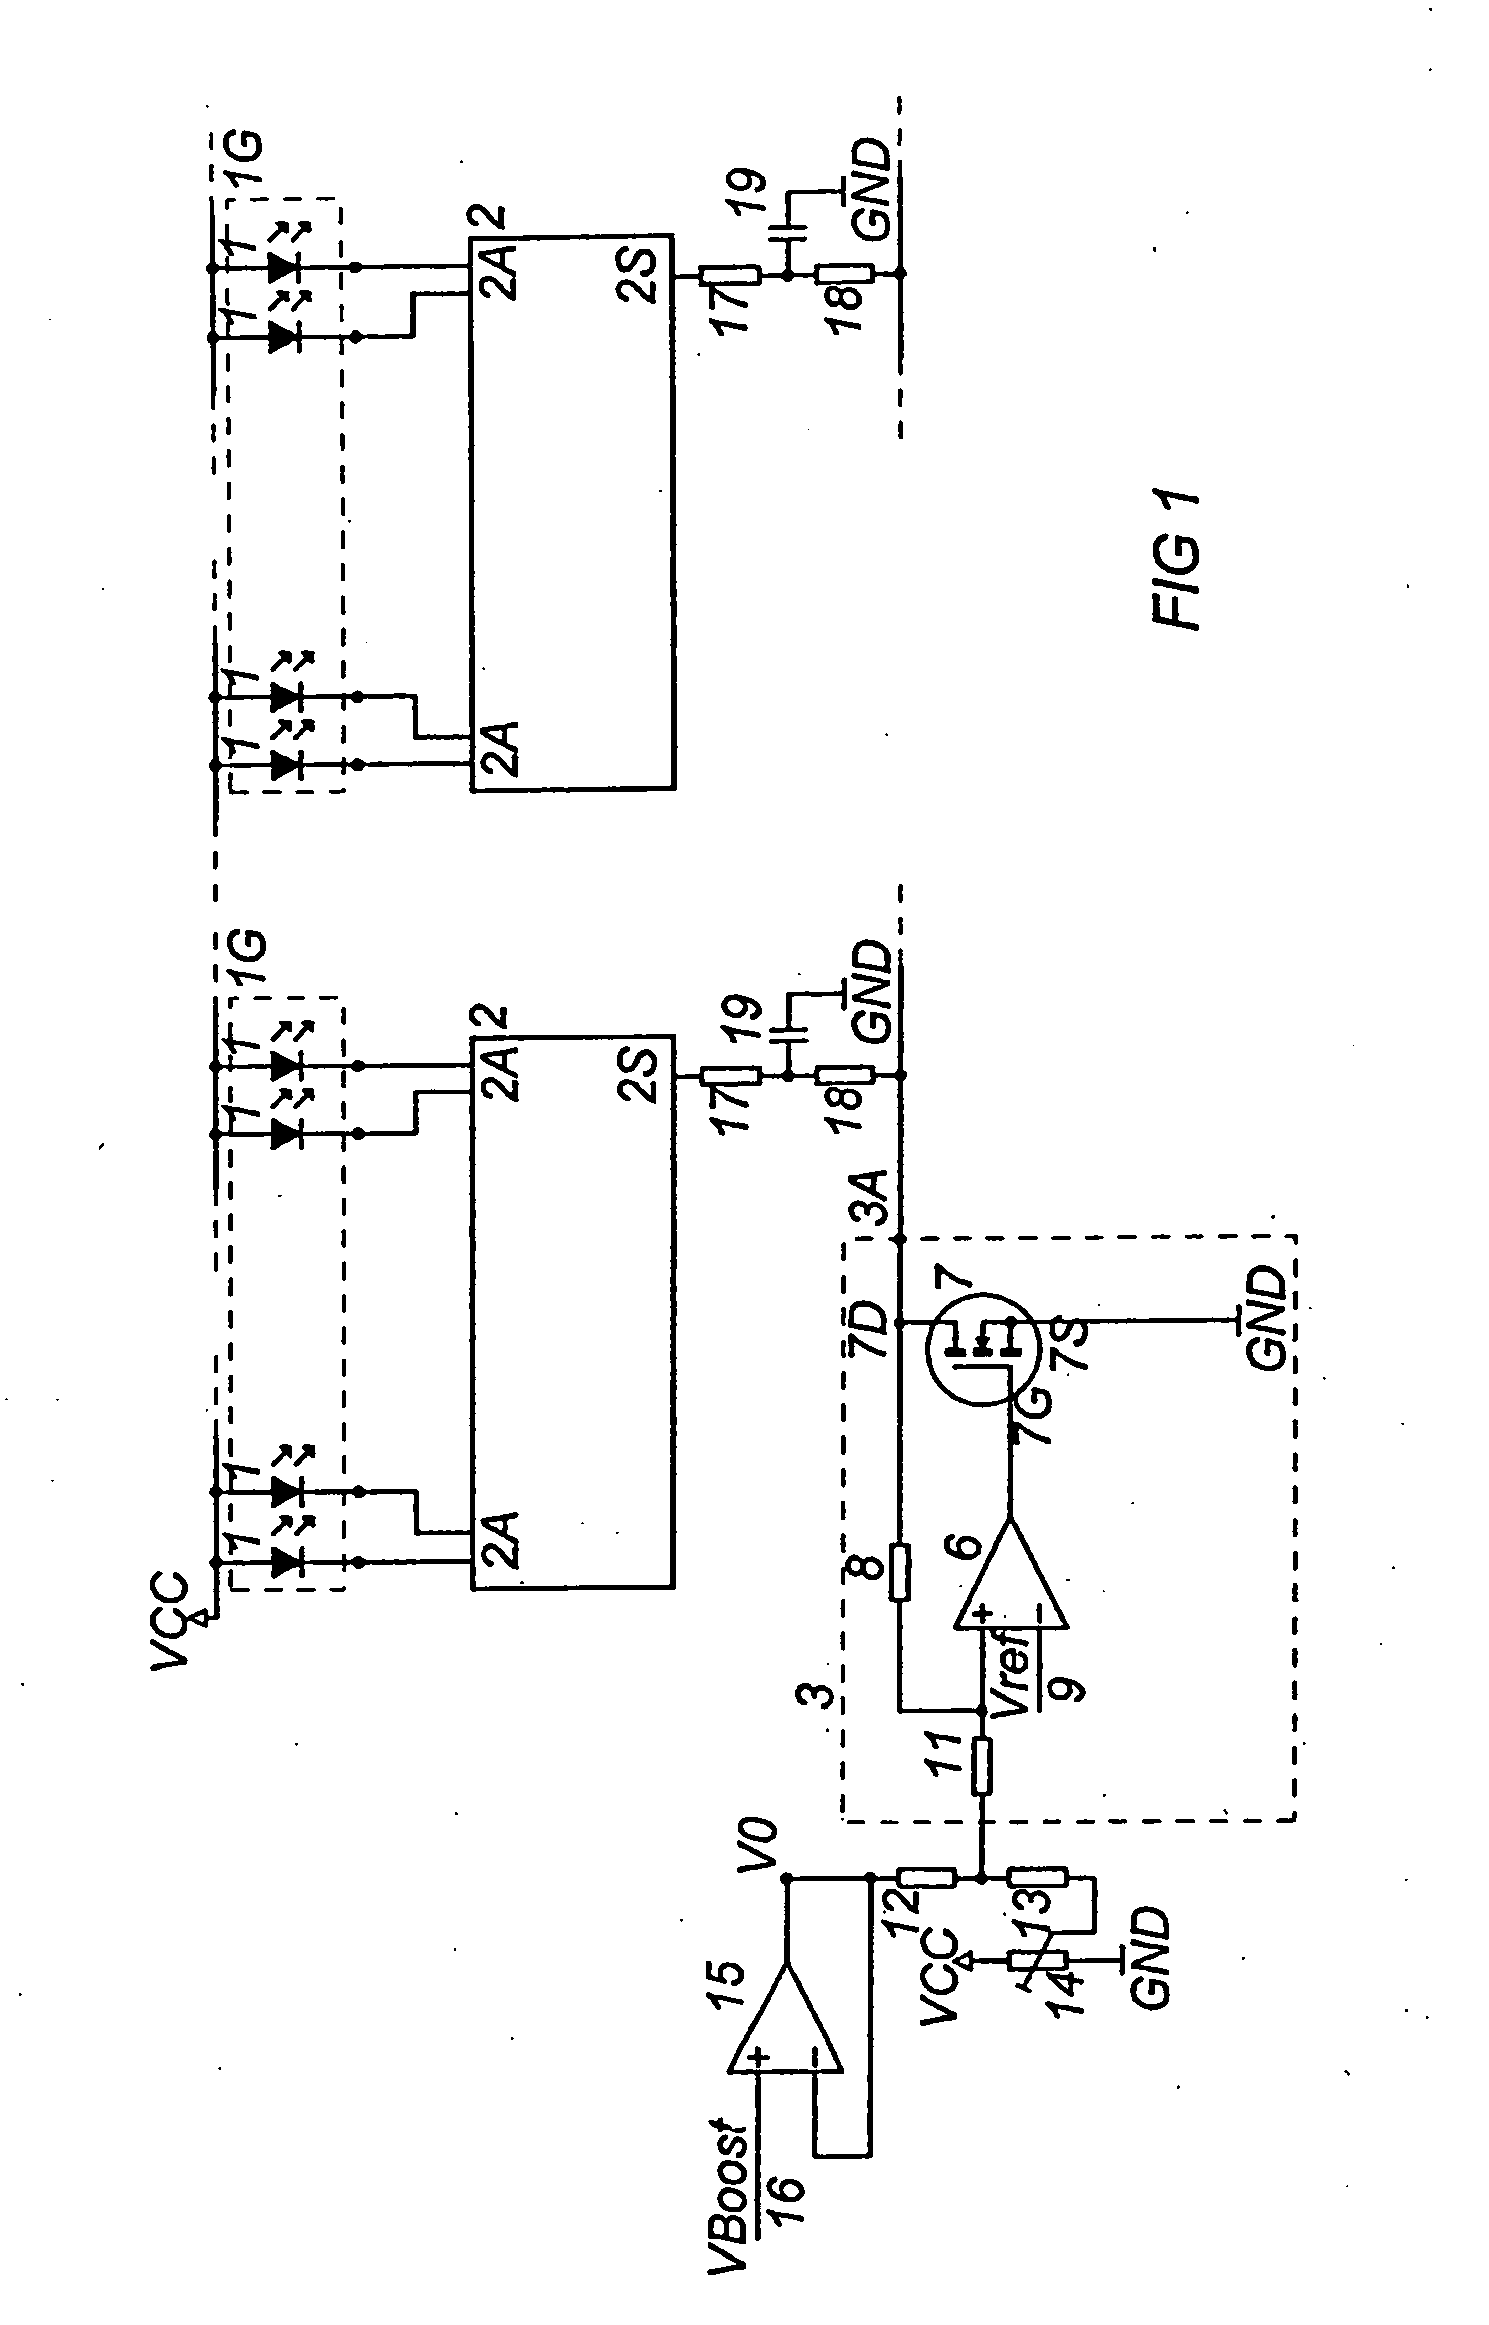 Circuit arrangement for controlling light emitting diodes